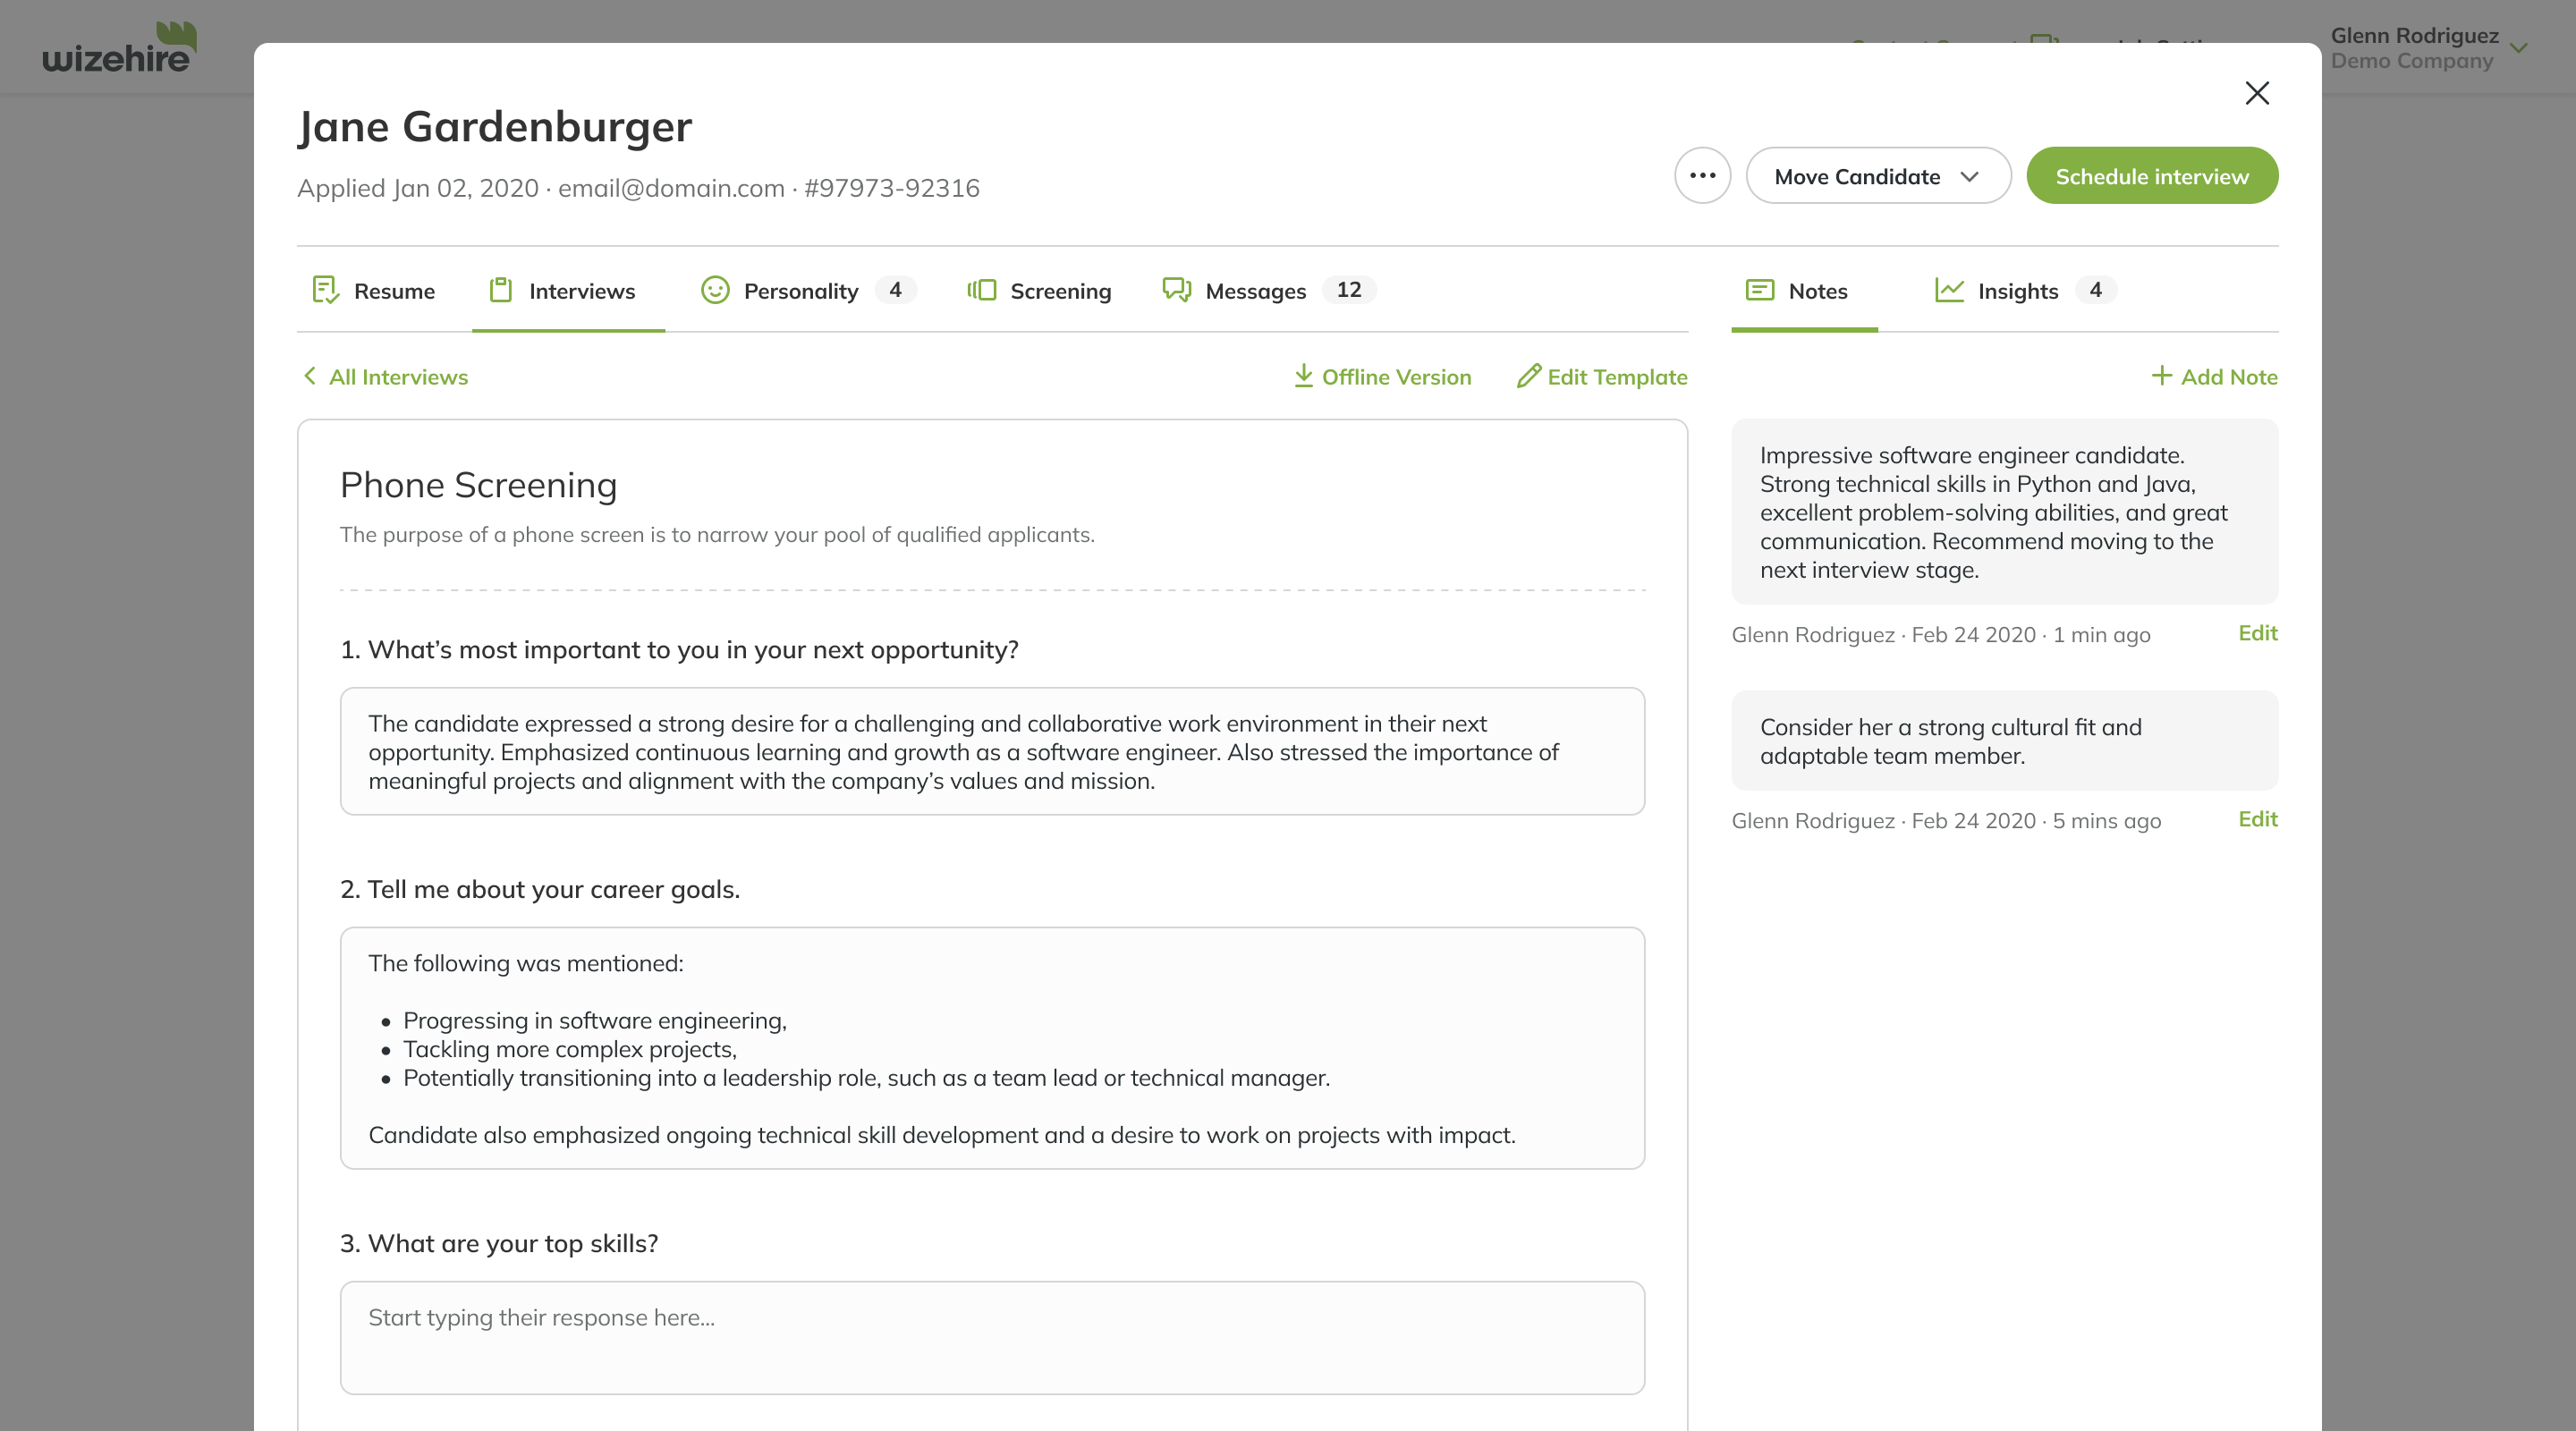 Frame of the candidate page used for tesing the new design system